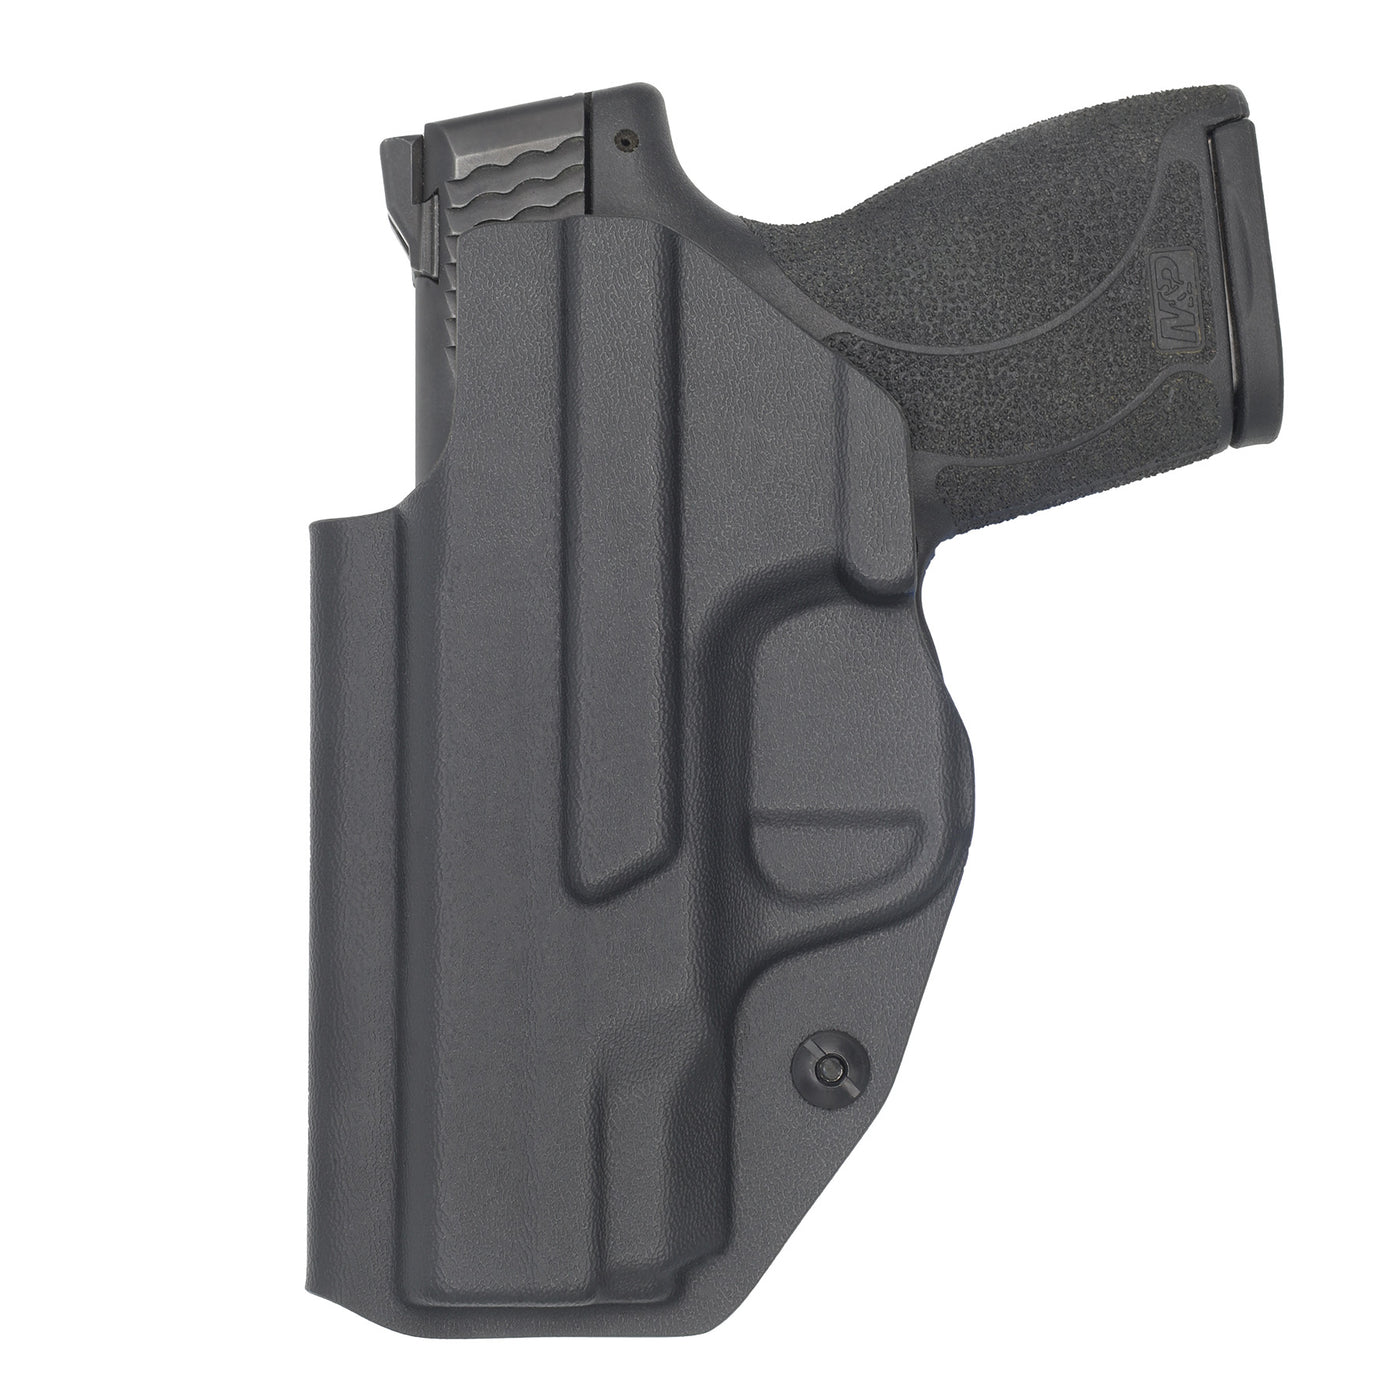 C&G Holsters quick ship Covert IWB kydex holster for Smith & Wesson M&P Shield 45 in black rear view